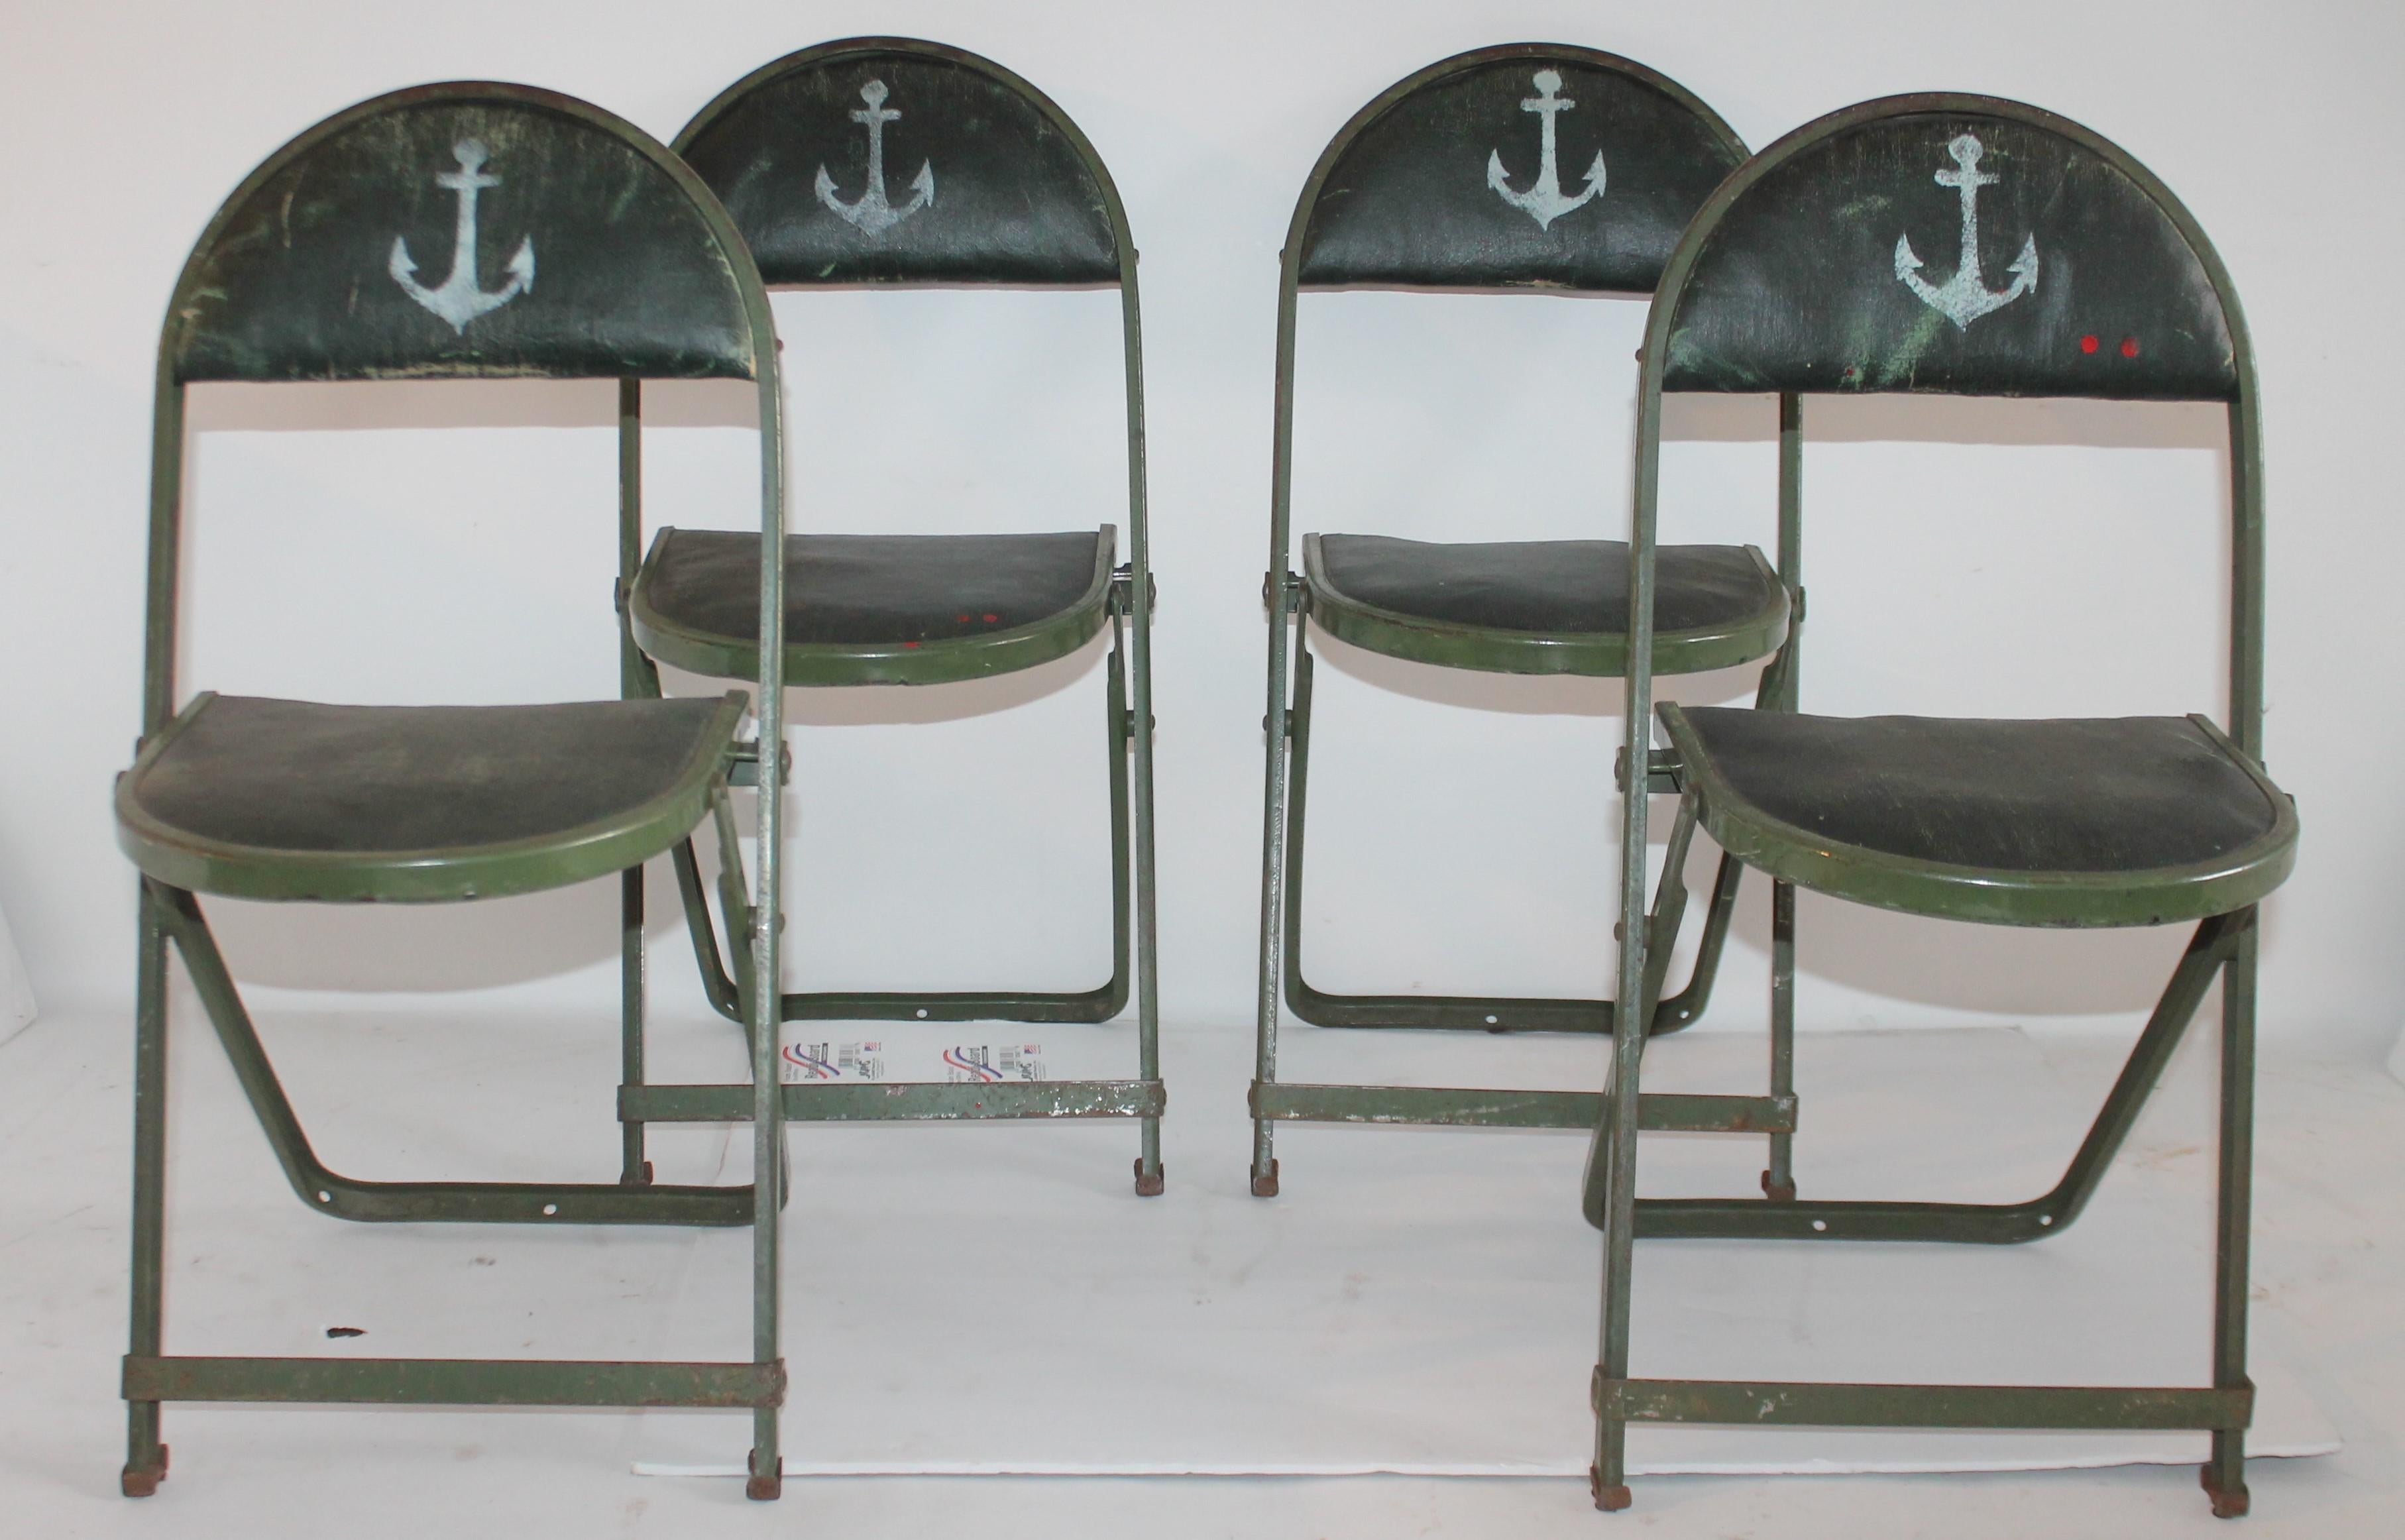 This very cool child's original green painted folding table and folding padded chairs are in very good condition. The chairs have the original oil cloth seats and backs on every chair. They are all painted green with little white painted anchor's on